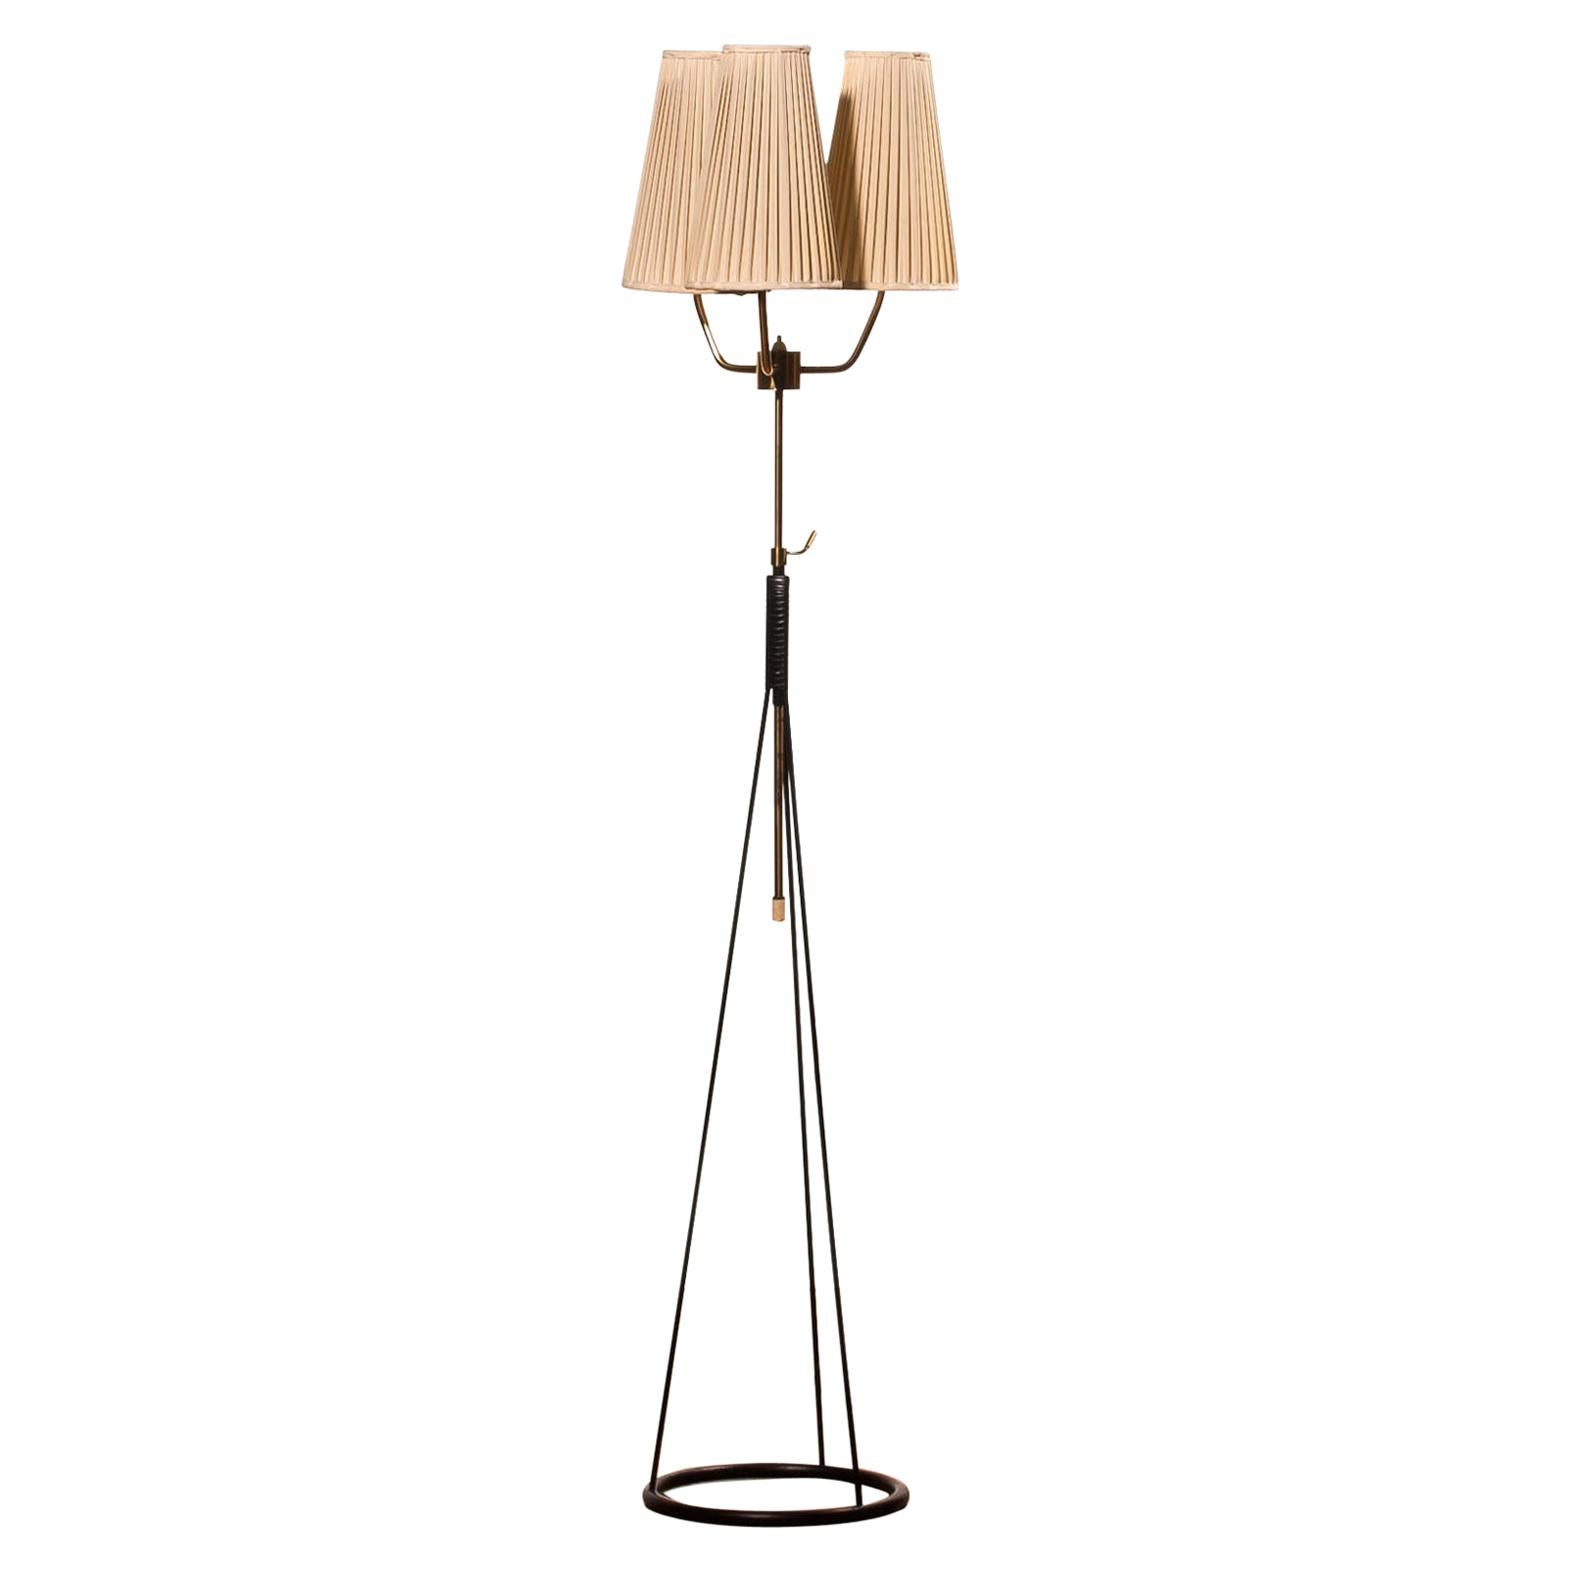 Extreme beautiful floor lamp by Falkenbergs Belysning.
The typical open base is made of metal and built up with brass parts with making it in total very beautiful.
E26 and E27 screw lamps 110 and 220 volts.
Measures: The height is adjustable